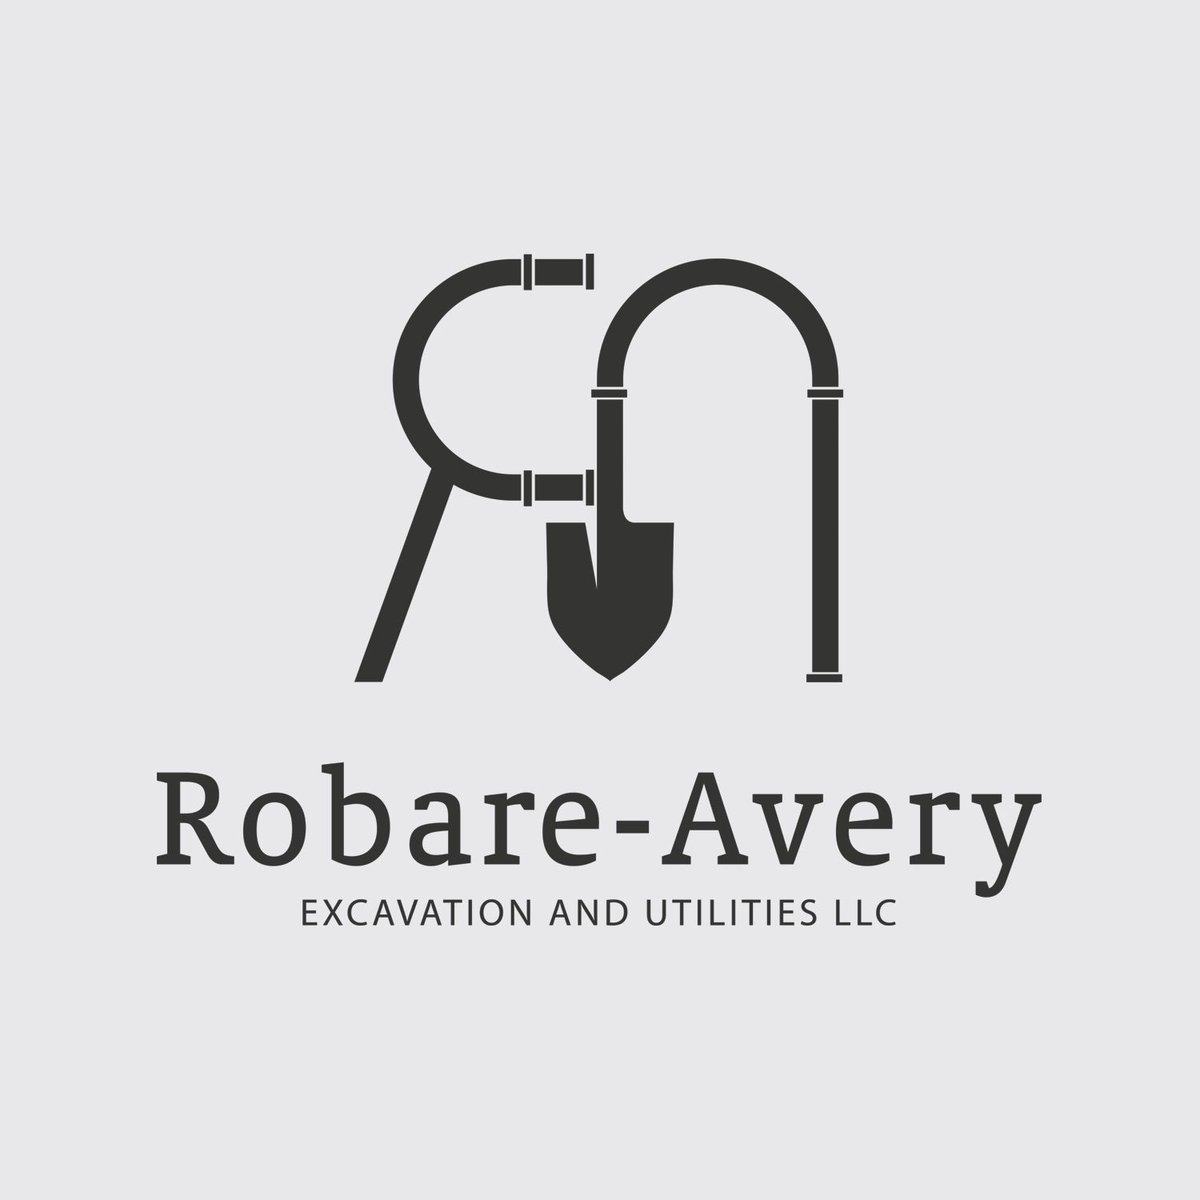 I made this #LogoProposal today for a #Excavation and #Utilities #Engineering firm

#Graphics
#DigitalArt
#freelancedesigner
#freelancer
#NeedaLogo
#ExcavationUtilities
#EngineeringCompany
#DrainagePipes
#SewerPipes
#PipeLaying
#ElectricalCables
#constructionworker 
#LayingPipes